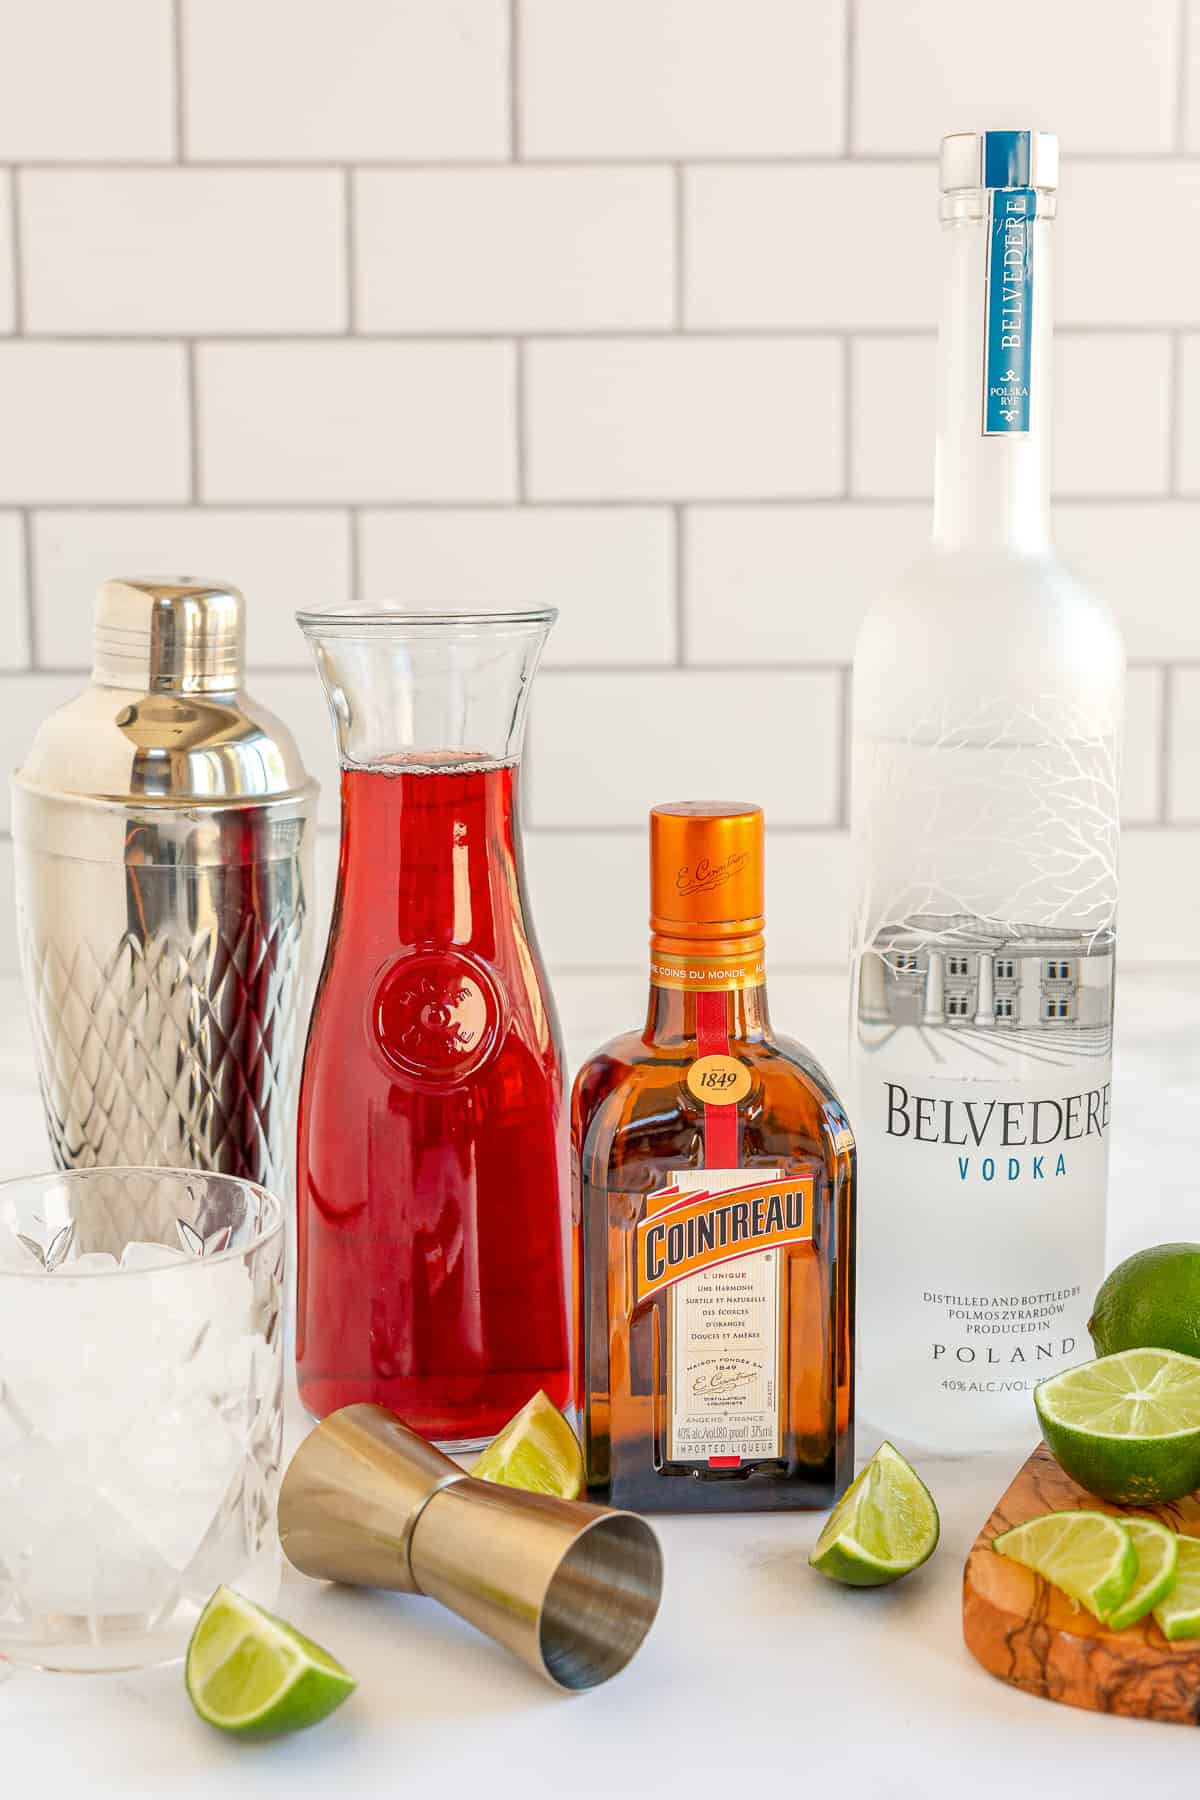 A bottle of vodka, Countreau, and a carafe of cranberry juice surrounded by a cocktail shaker and lime wedges.